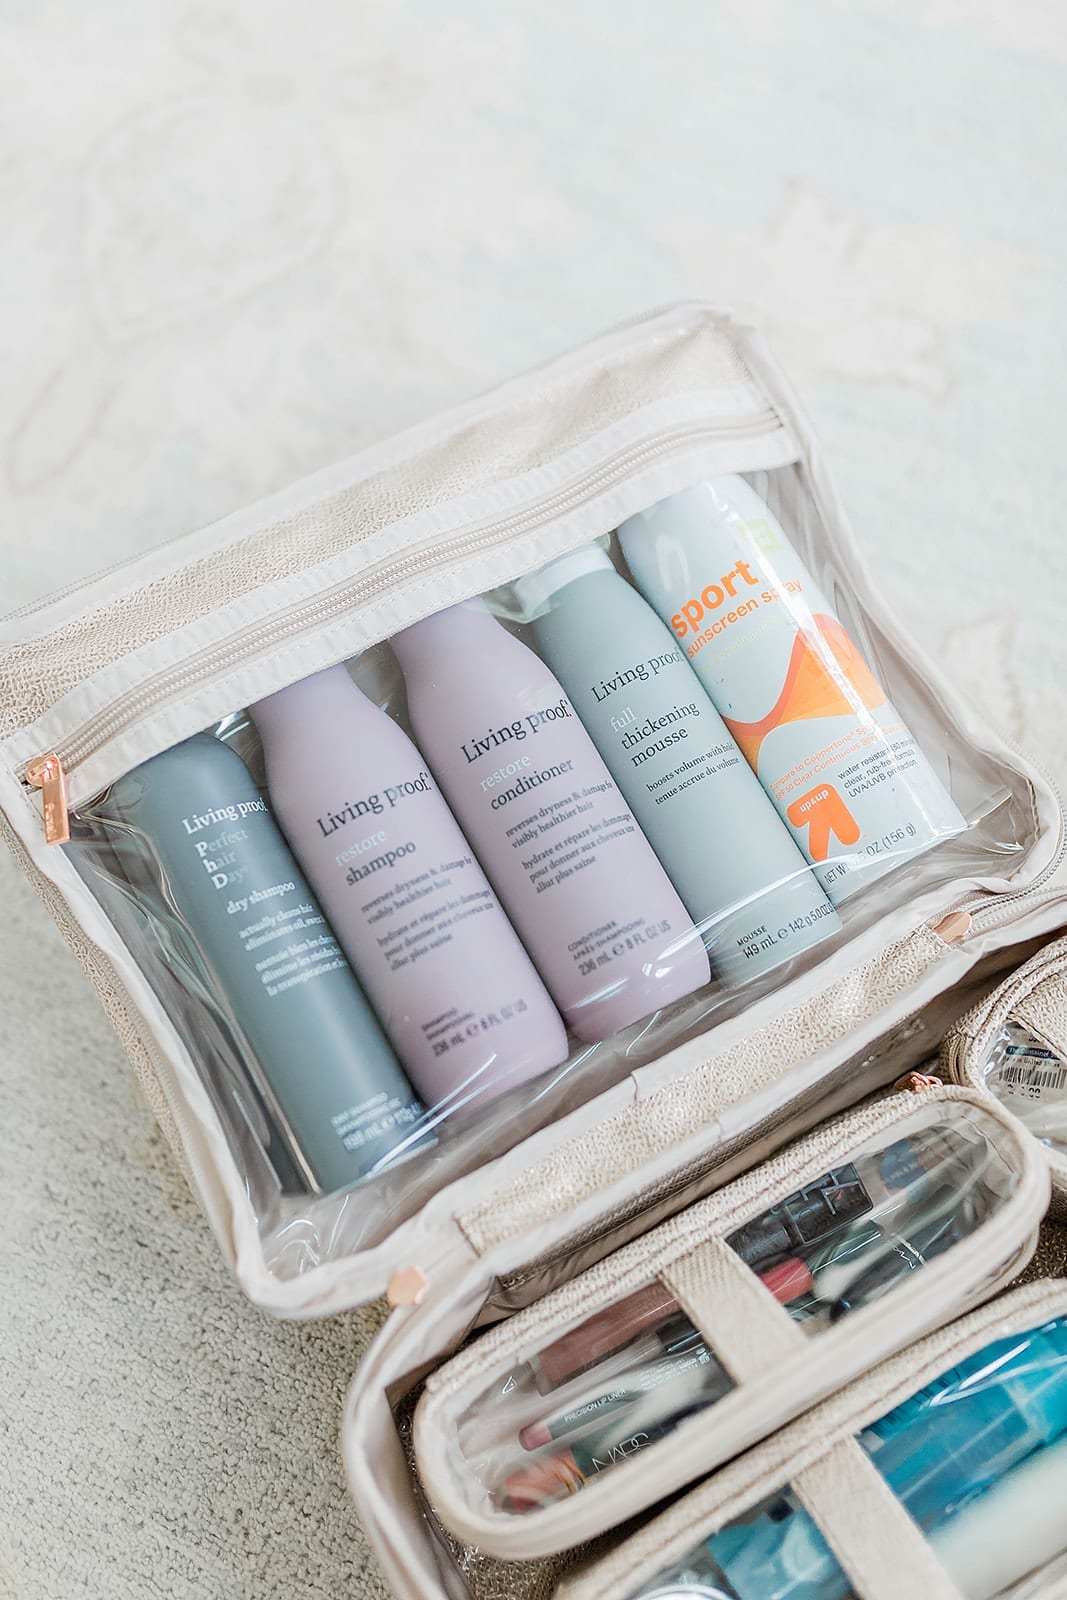 How to store full size shampoo bottles when you travel so that they don't spill!